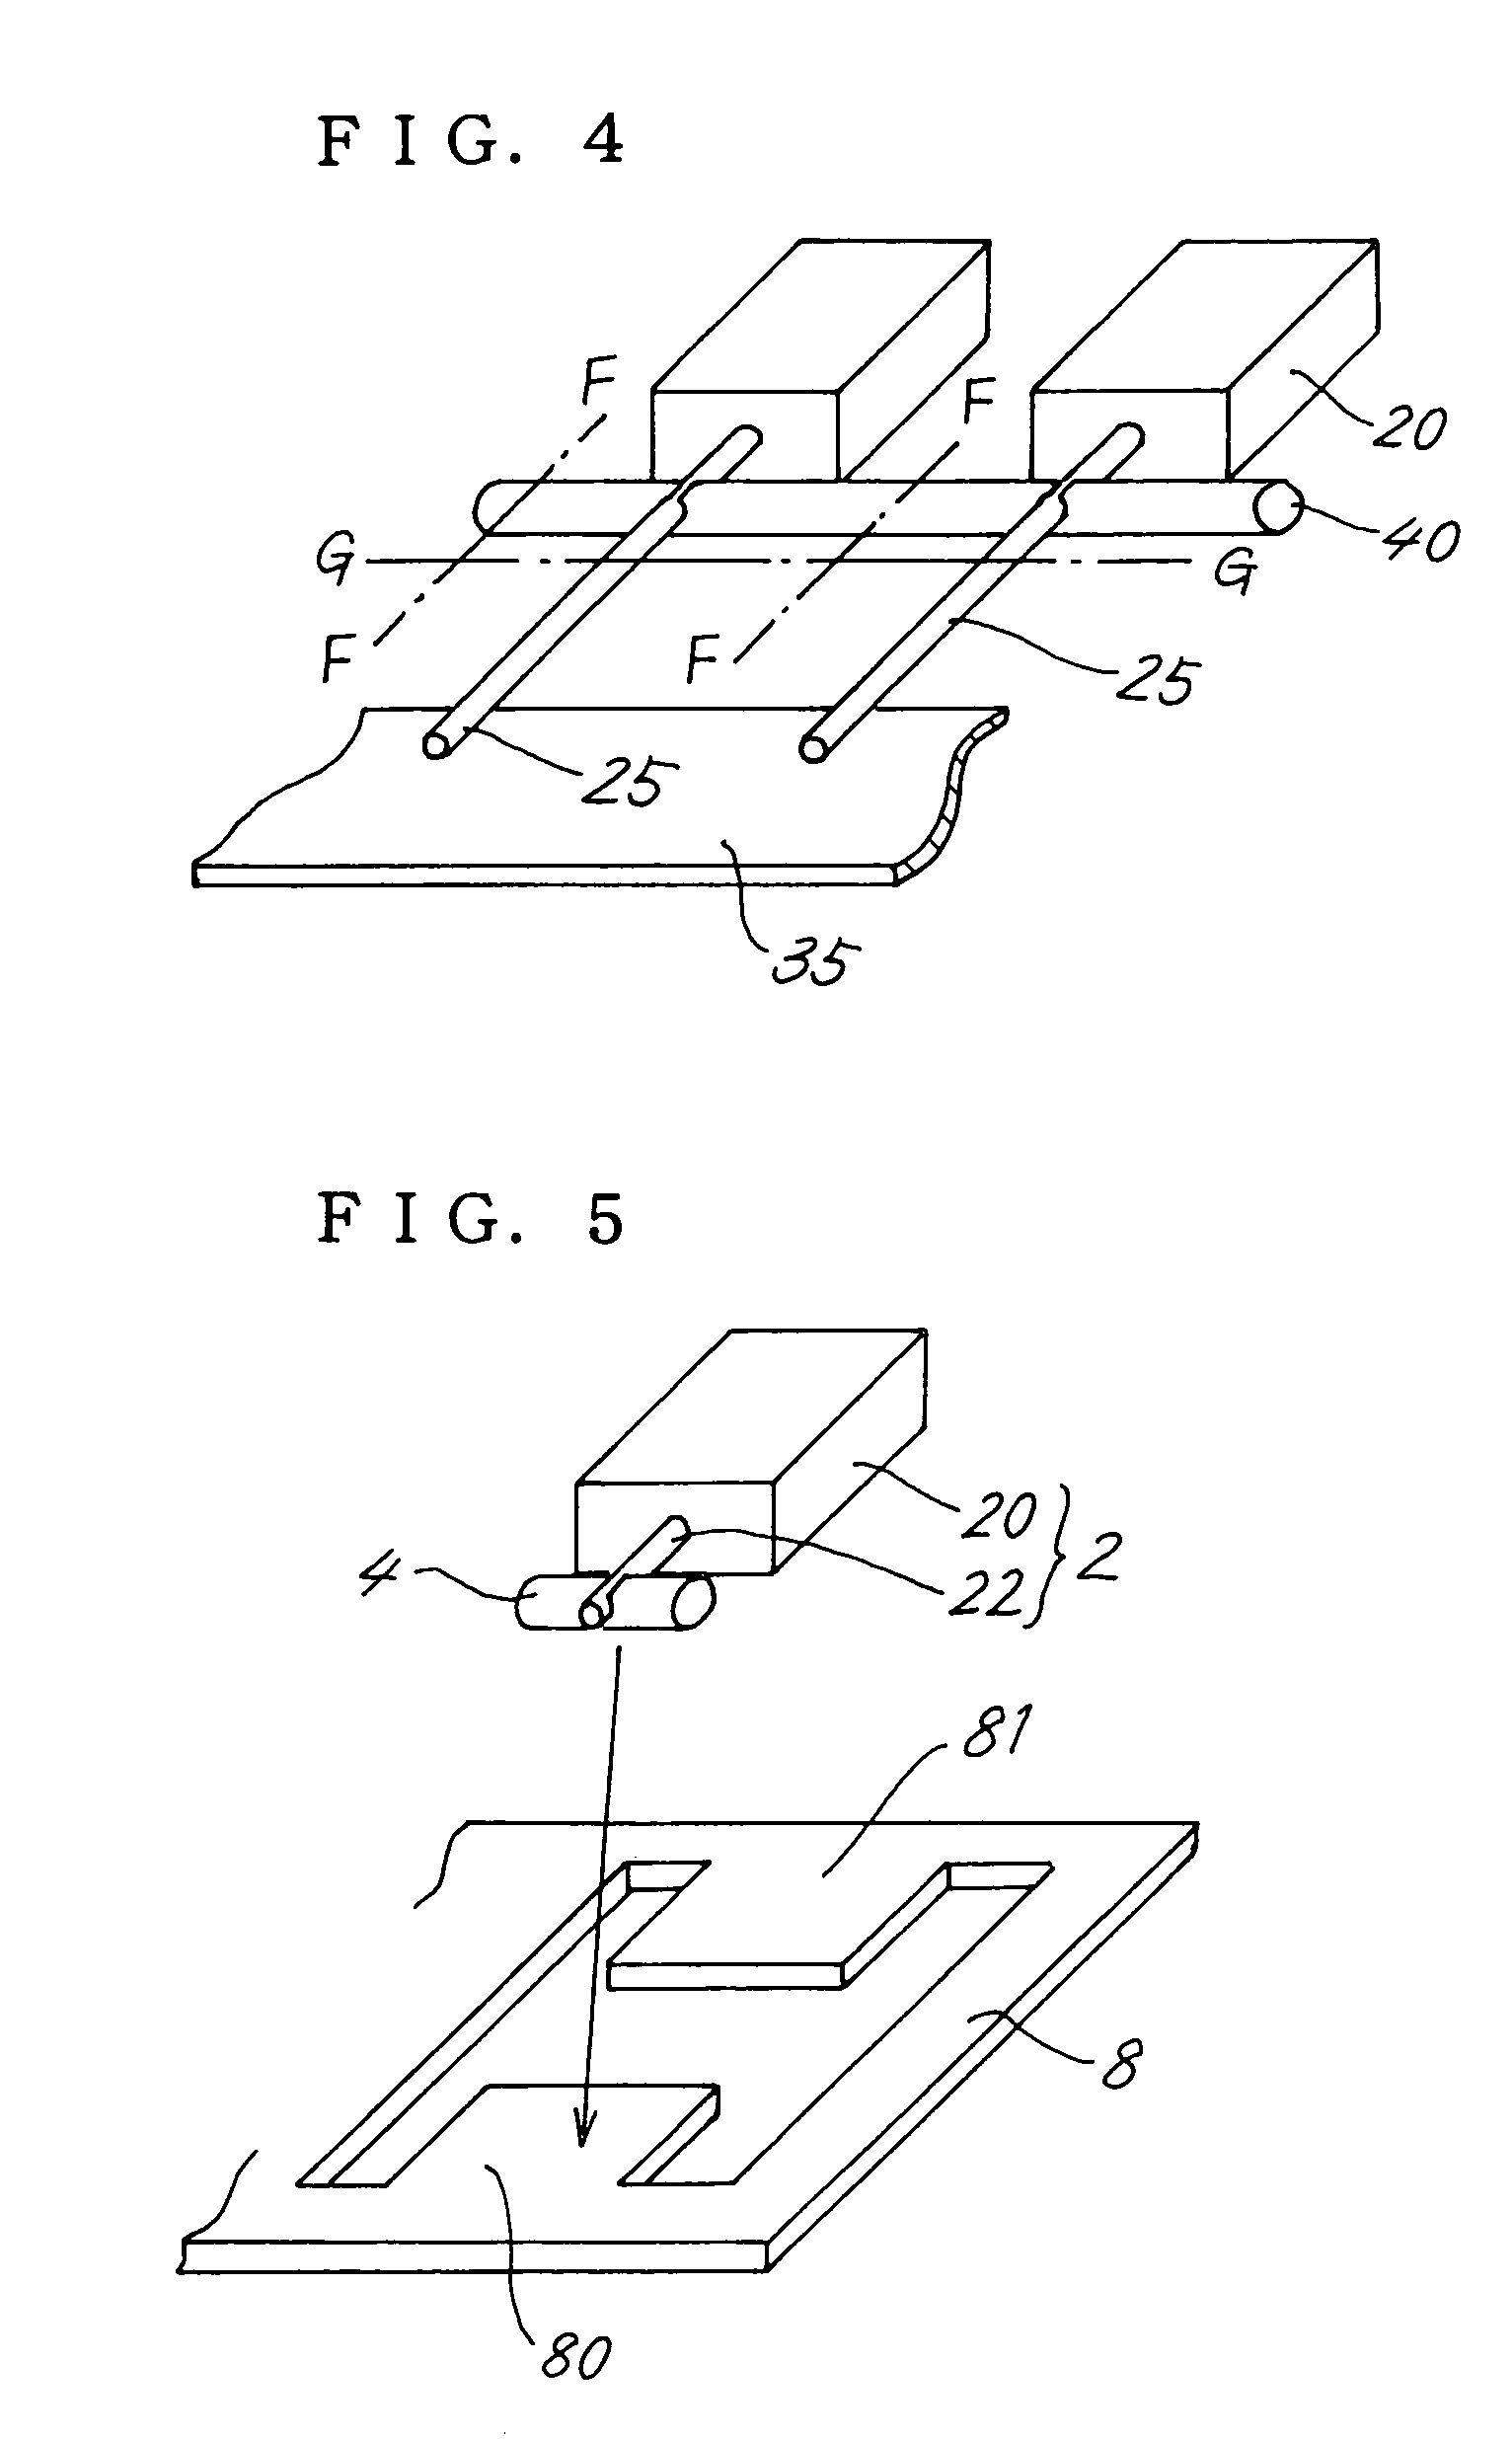 Solid electrolytic capacitor and method for manufacturing the same